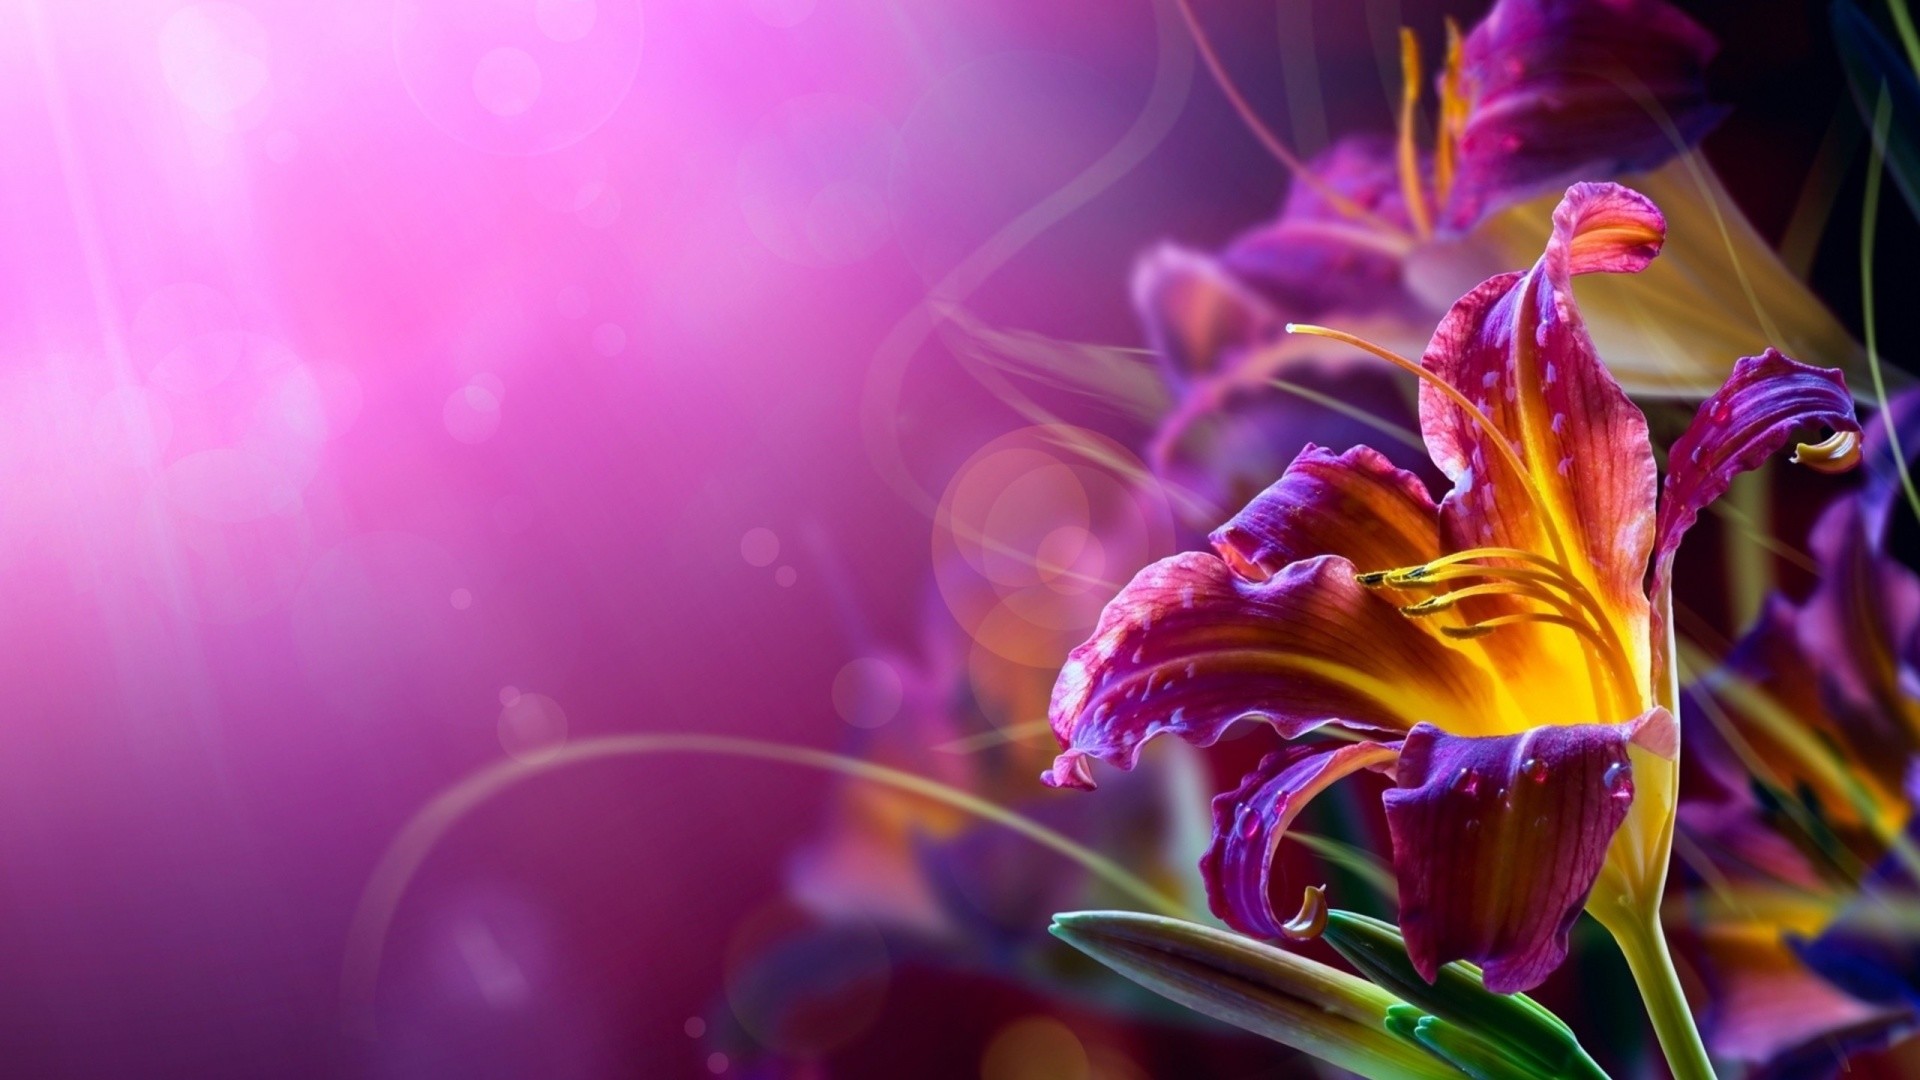 1920x1080 Excellent HD Quality Wallpapers Collection Picture Of A Flower